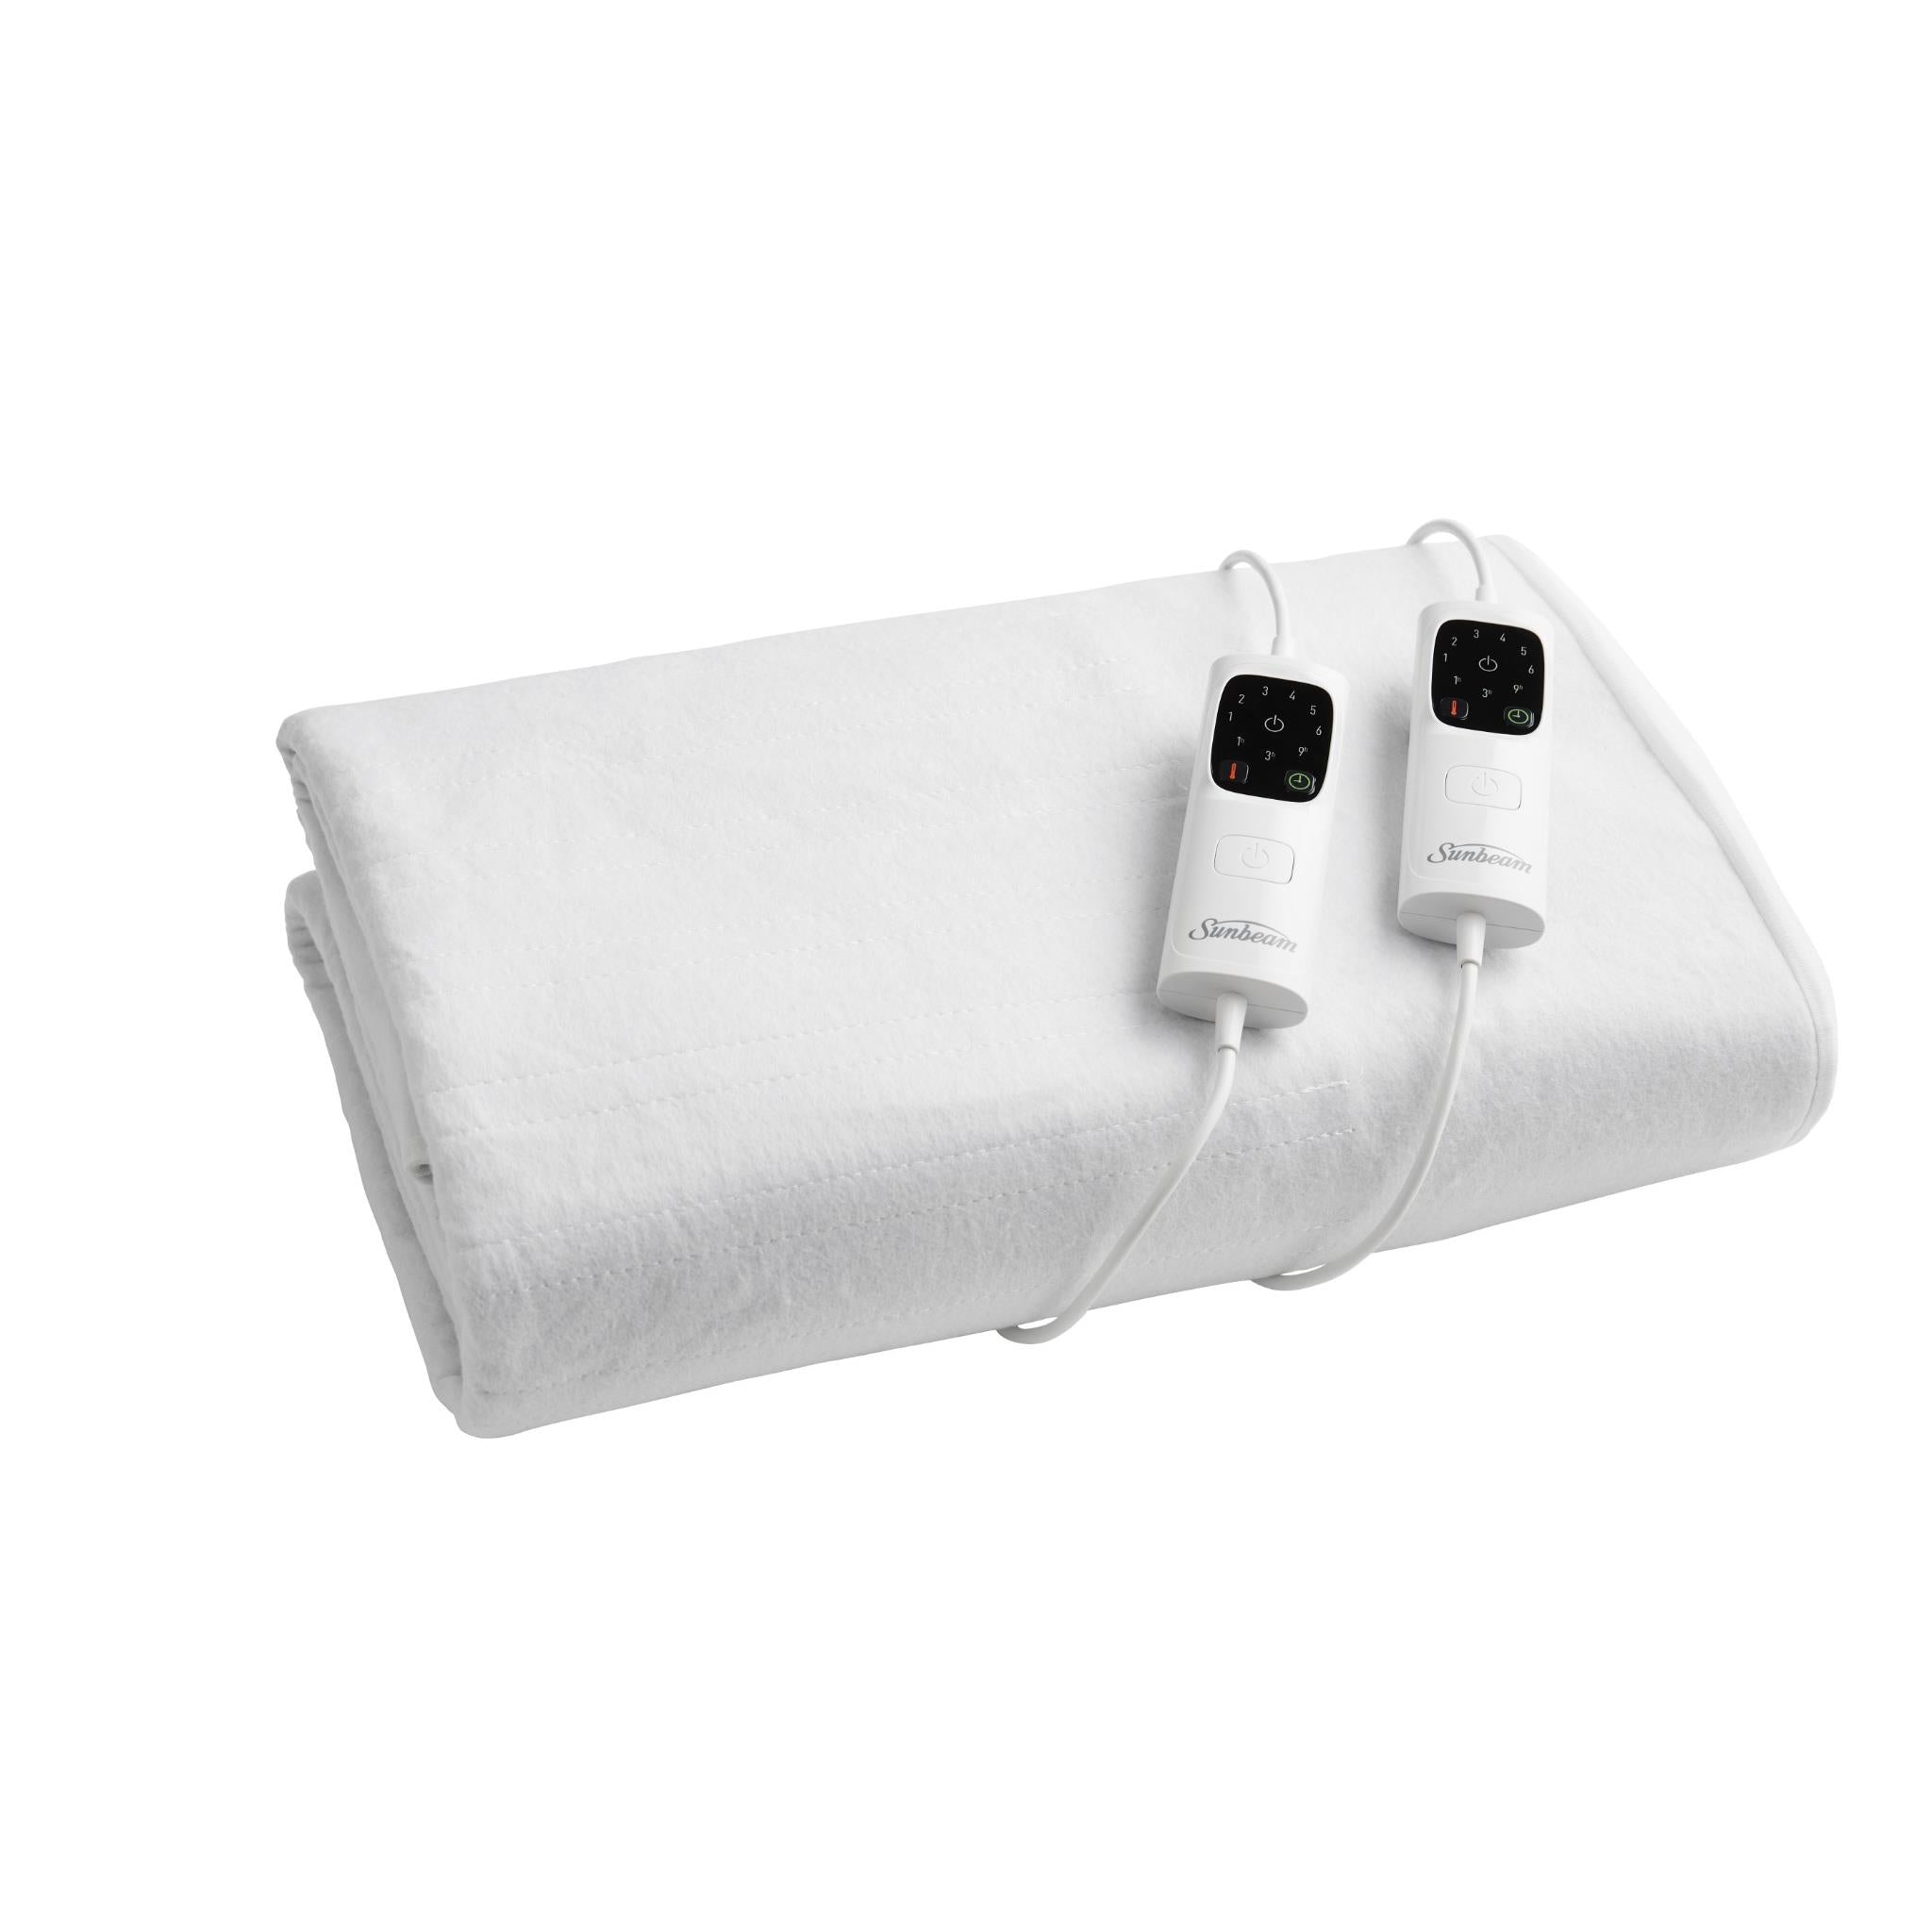 sunbeam sleep express fitted electric blanket (double)